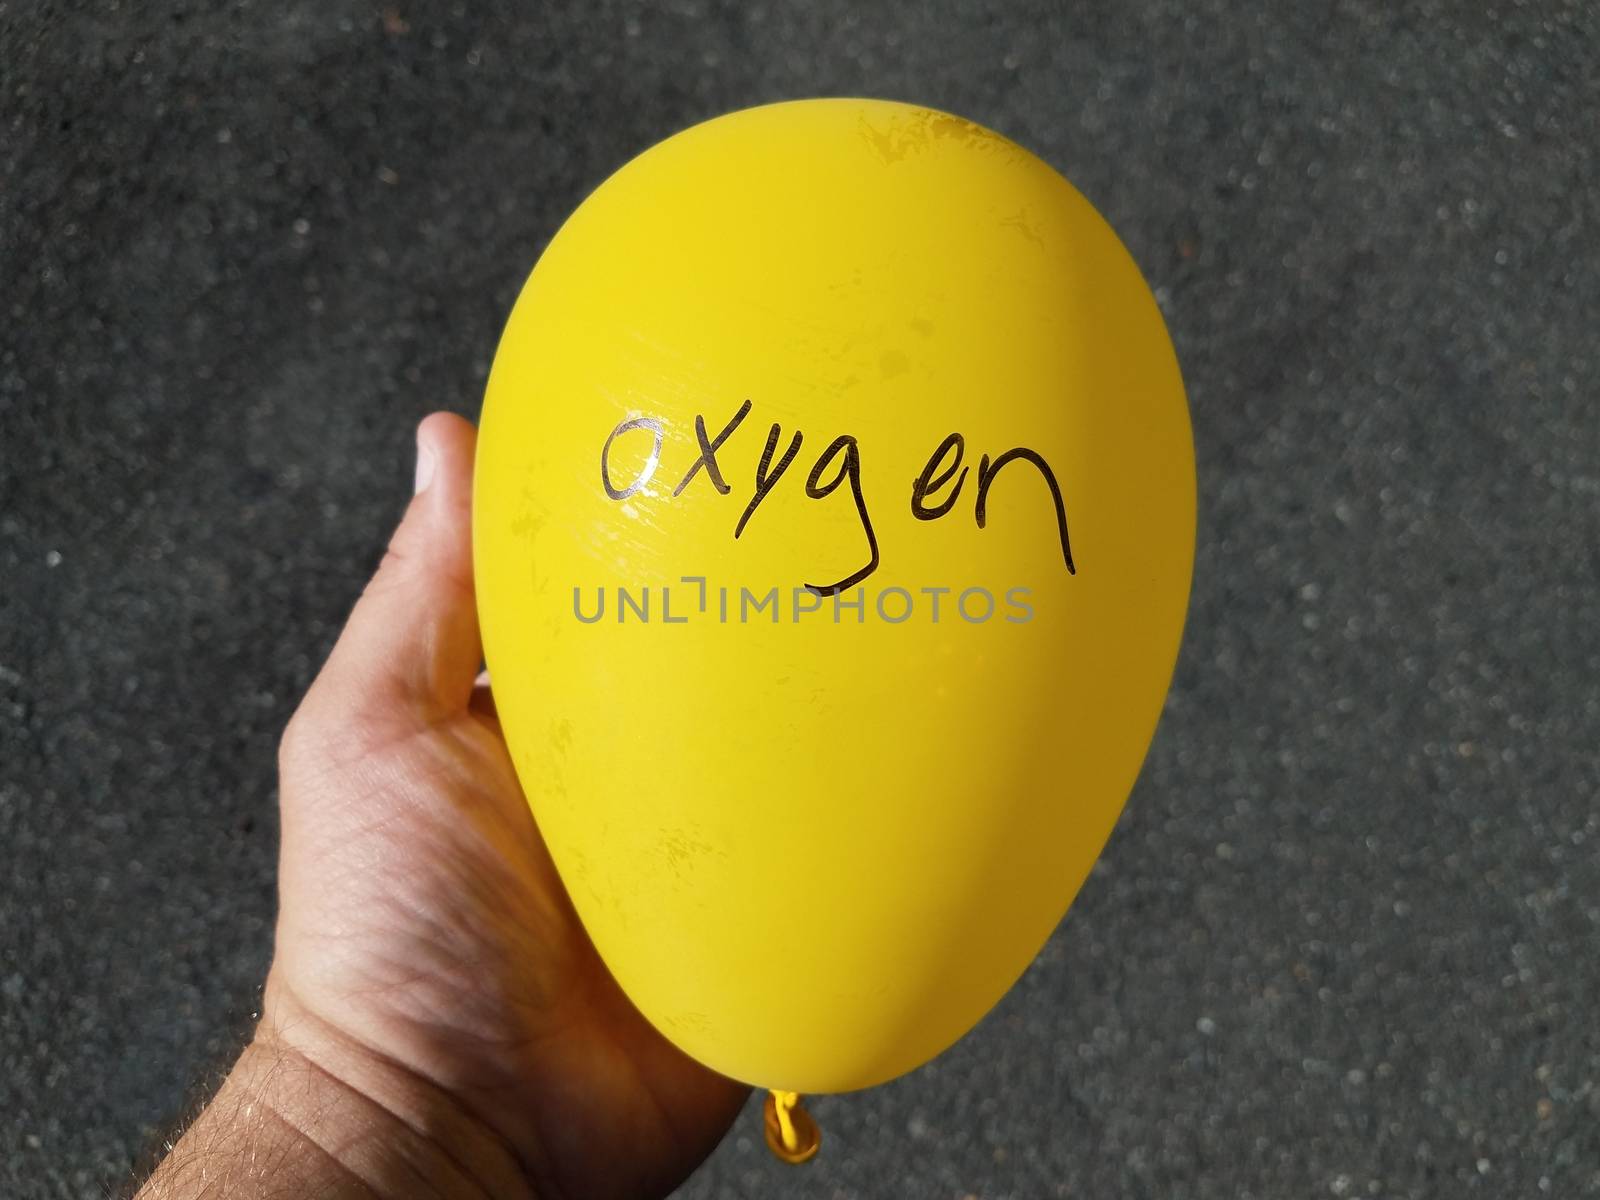 hand holding yellow balloon with oxygen written on it and black asphalt